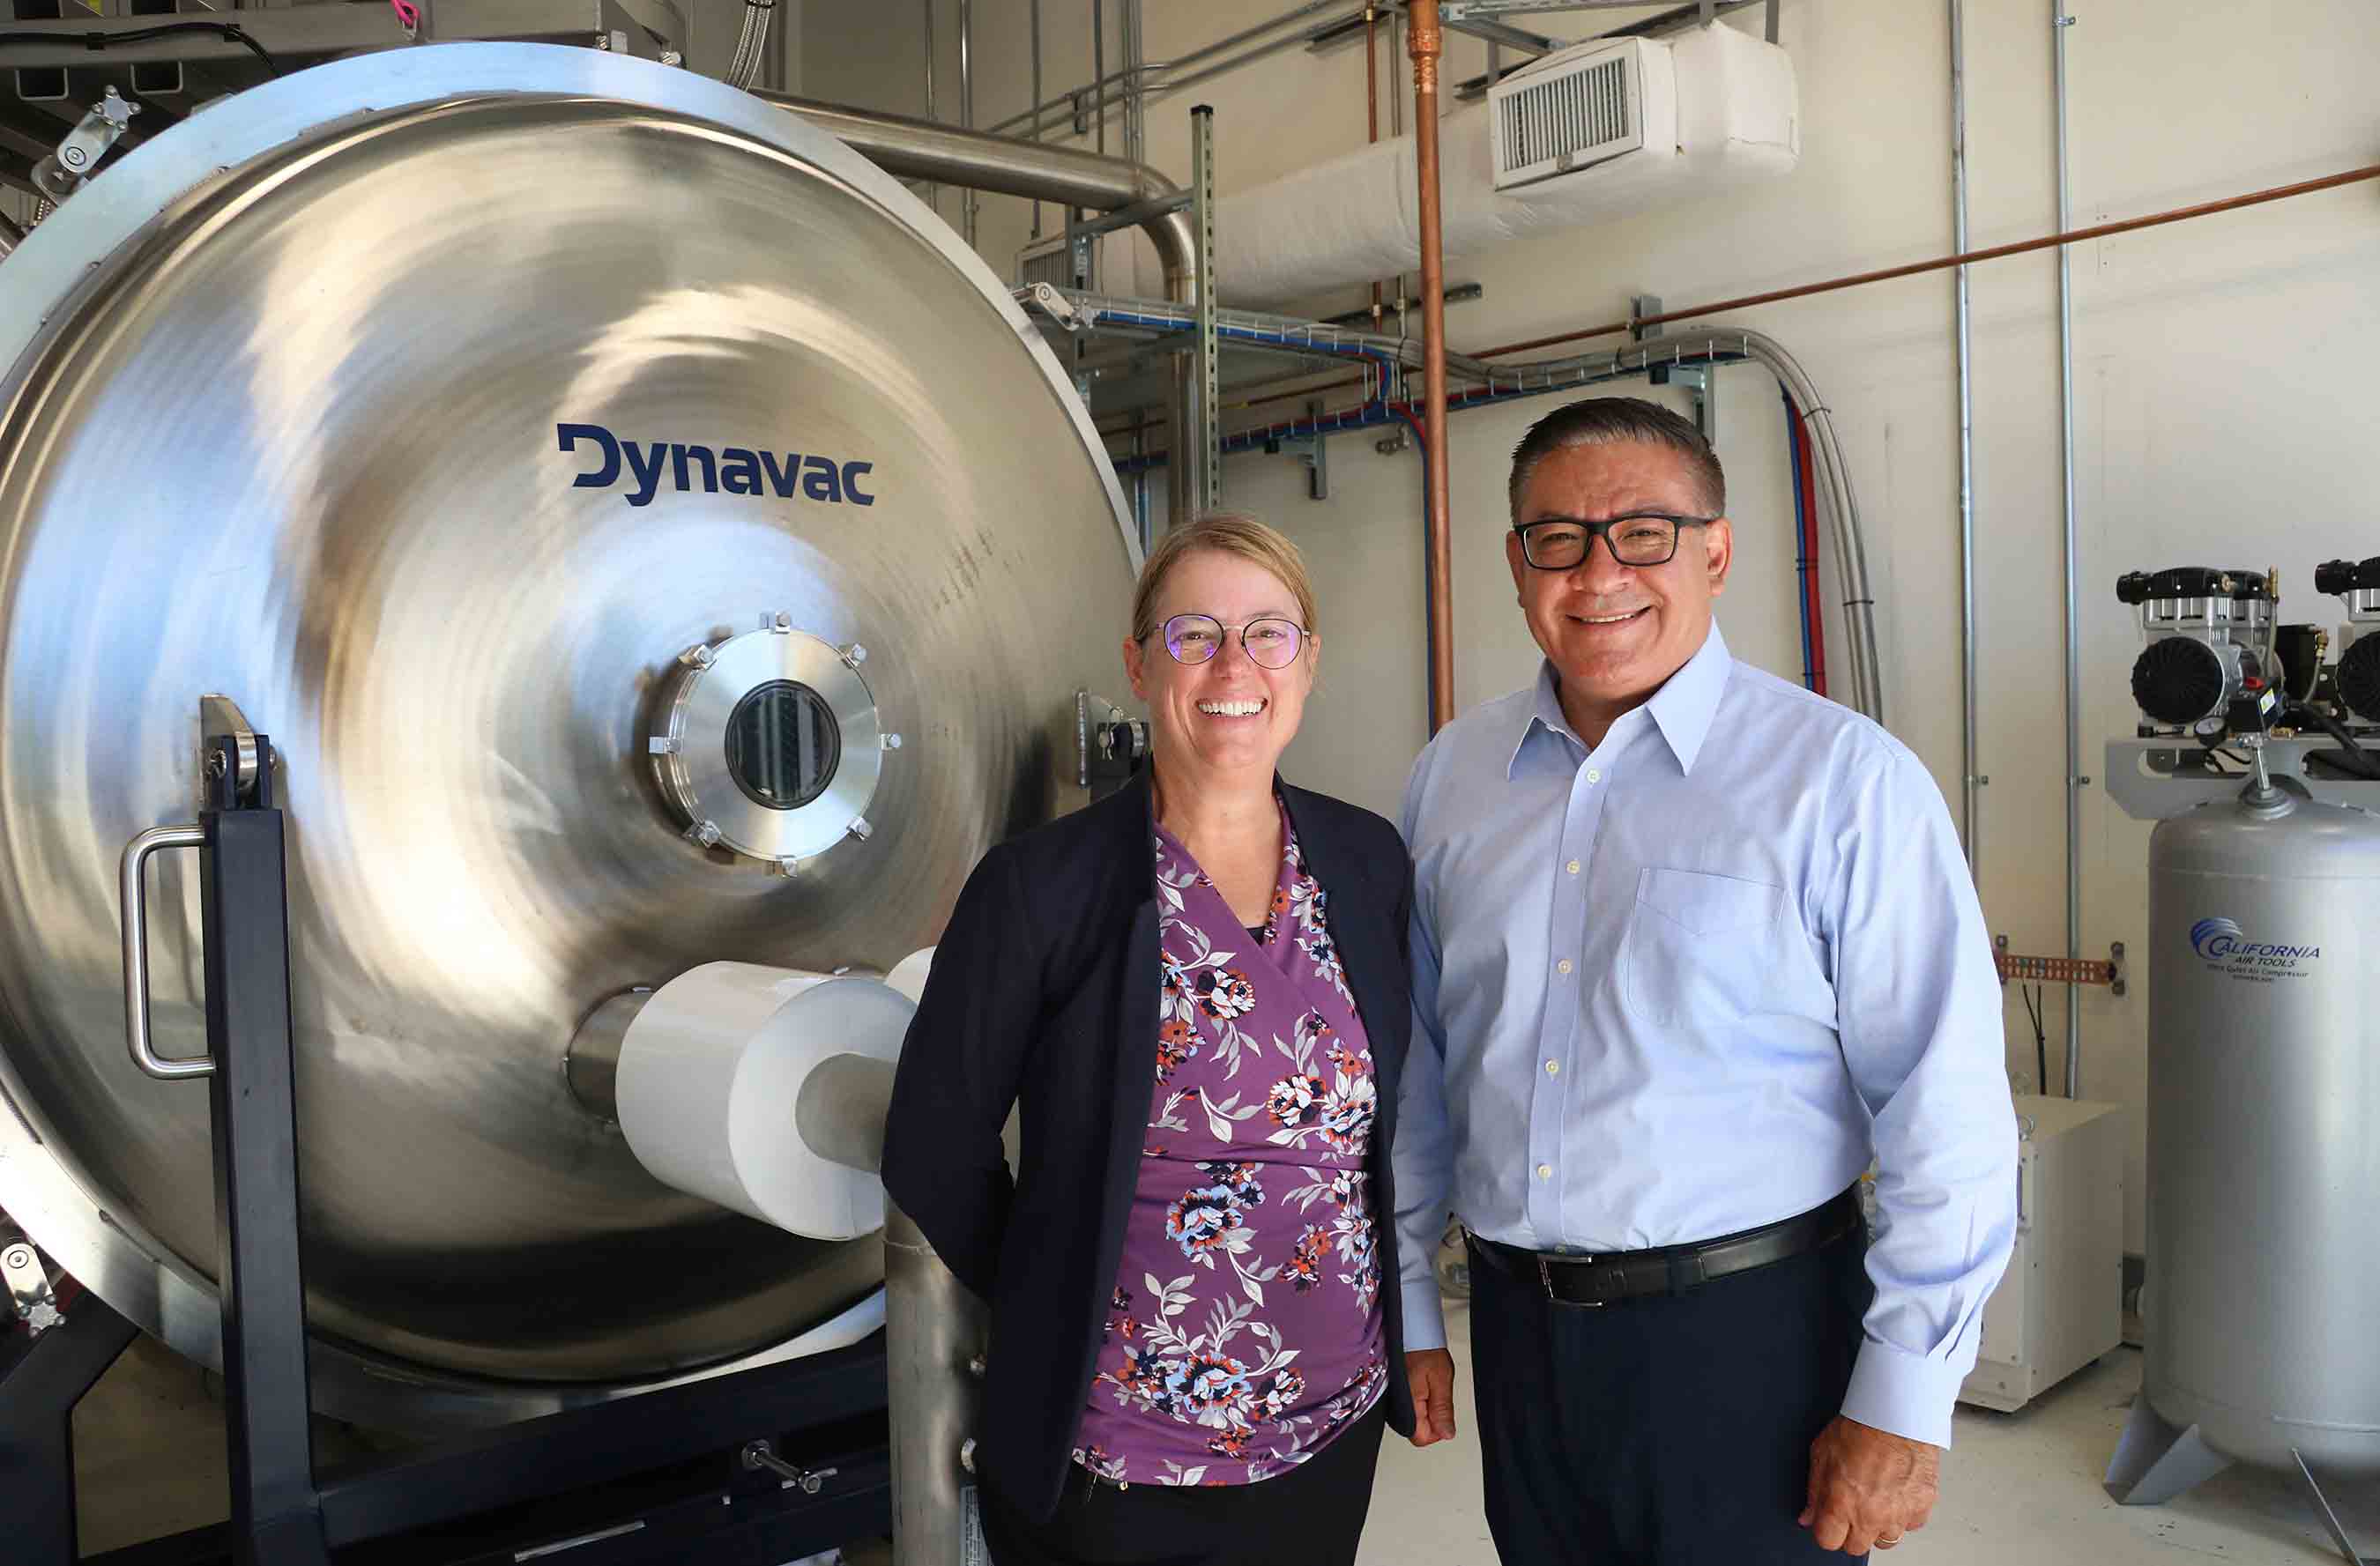 College of Engineering Dean Amy Fleischer and Congressman Salud Carbajal pose in front of a new piece of equipment at the Advanced Technologies Lab.